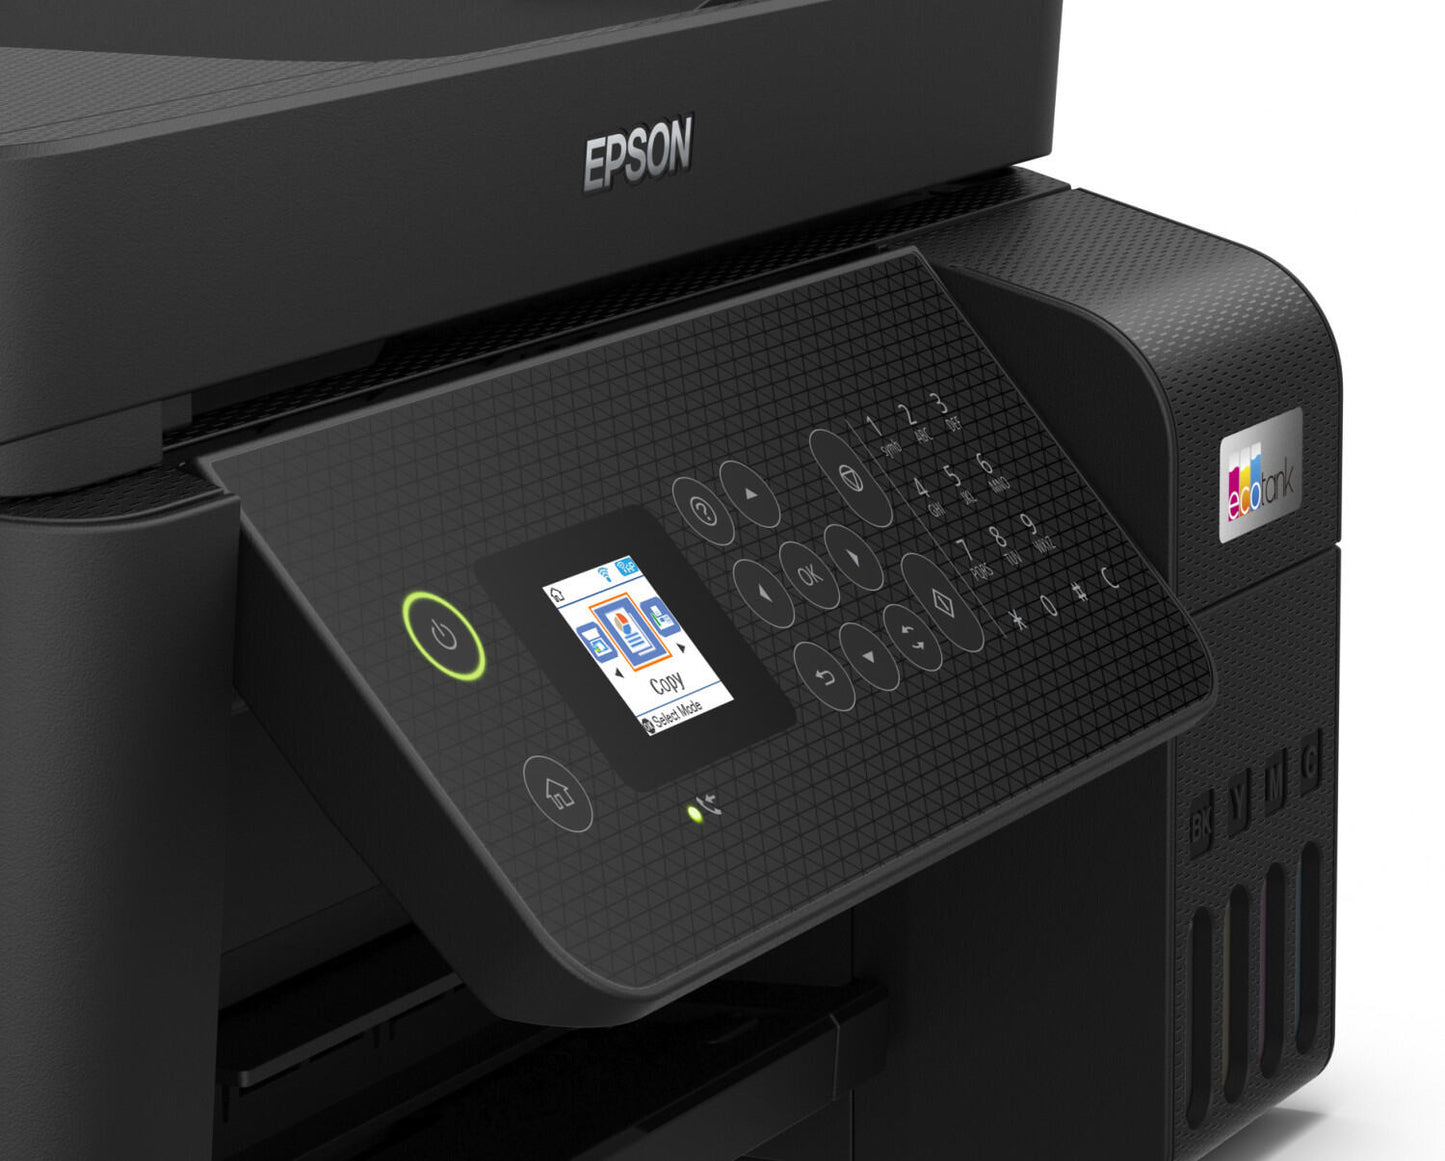 Epson EcoTank L5290 Wi-Fi All-in-One Ink Tank Printer (Print Scan Copy Fax) Wireless Heat-Free with ADF, 5760 x 1440 dpi, 33ppm, and LCD Screen